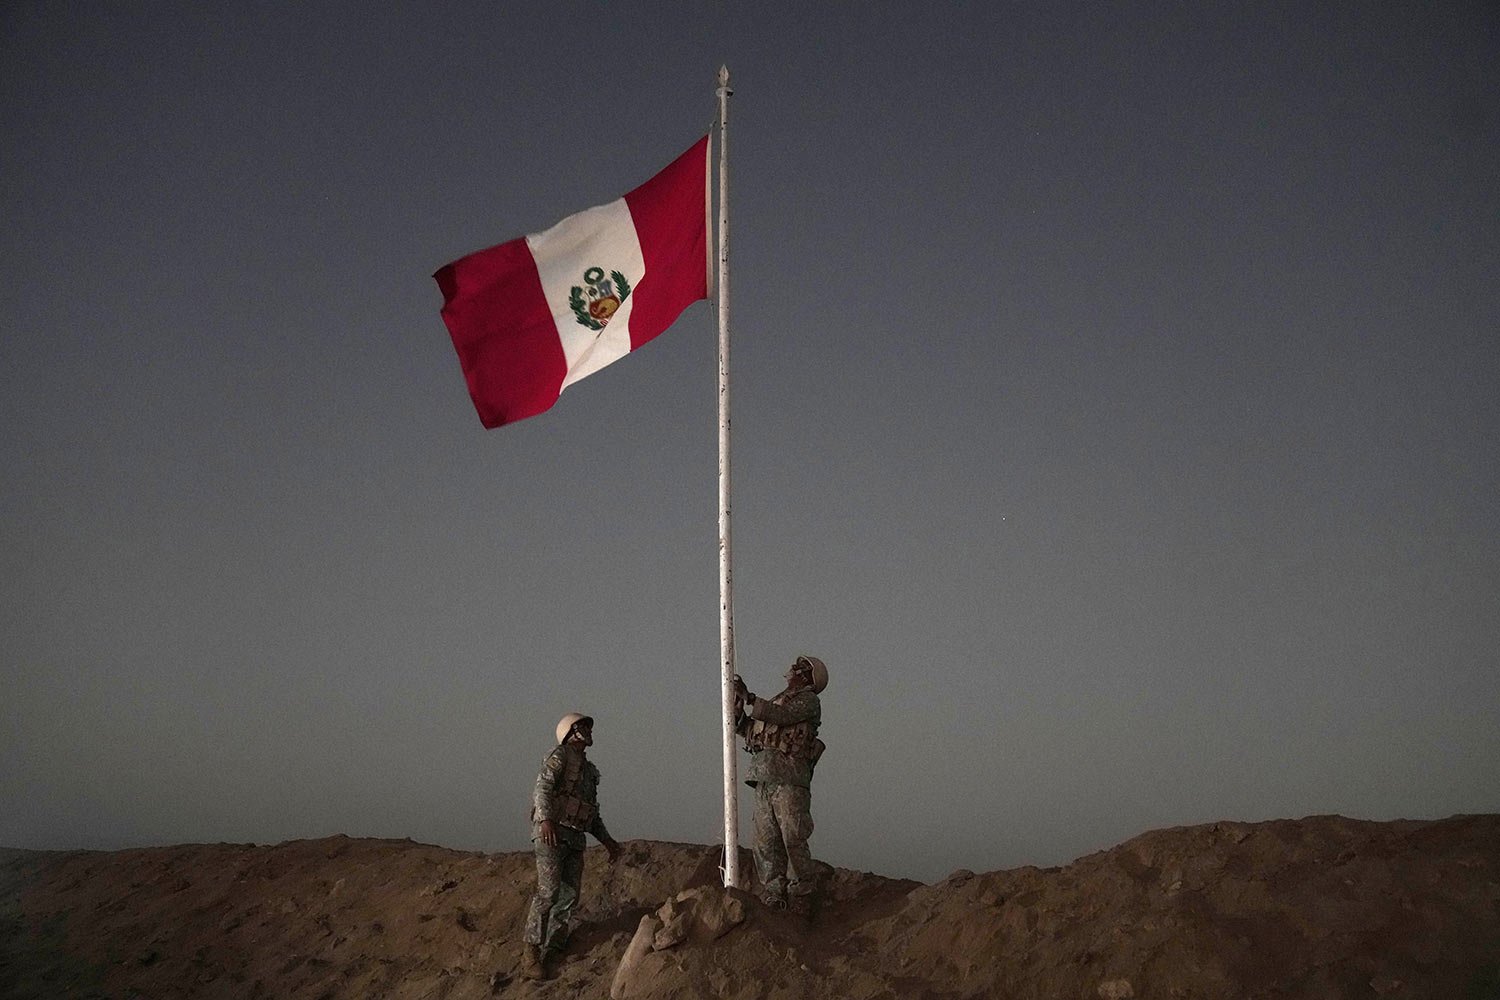  Peruvian soldiers raise their country's flag on the border with Chile in Tacna, Peru, April 28, 2023. A migration crisis at the border between Chile and Peru intensified as hundreds of migrants remained stranded, unable to cross into Peru. (AP Photo